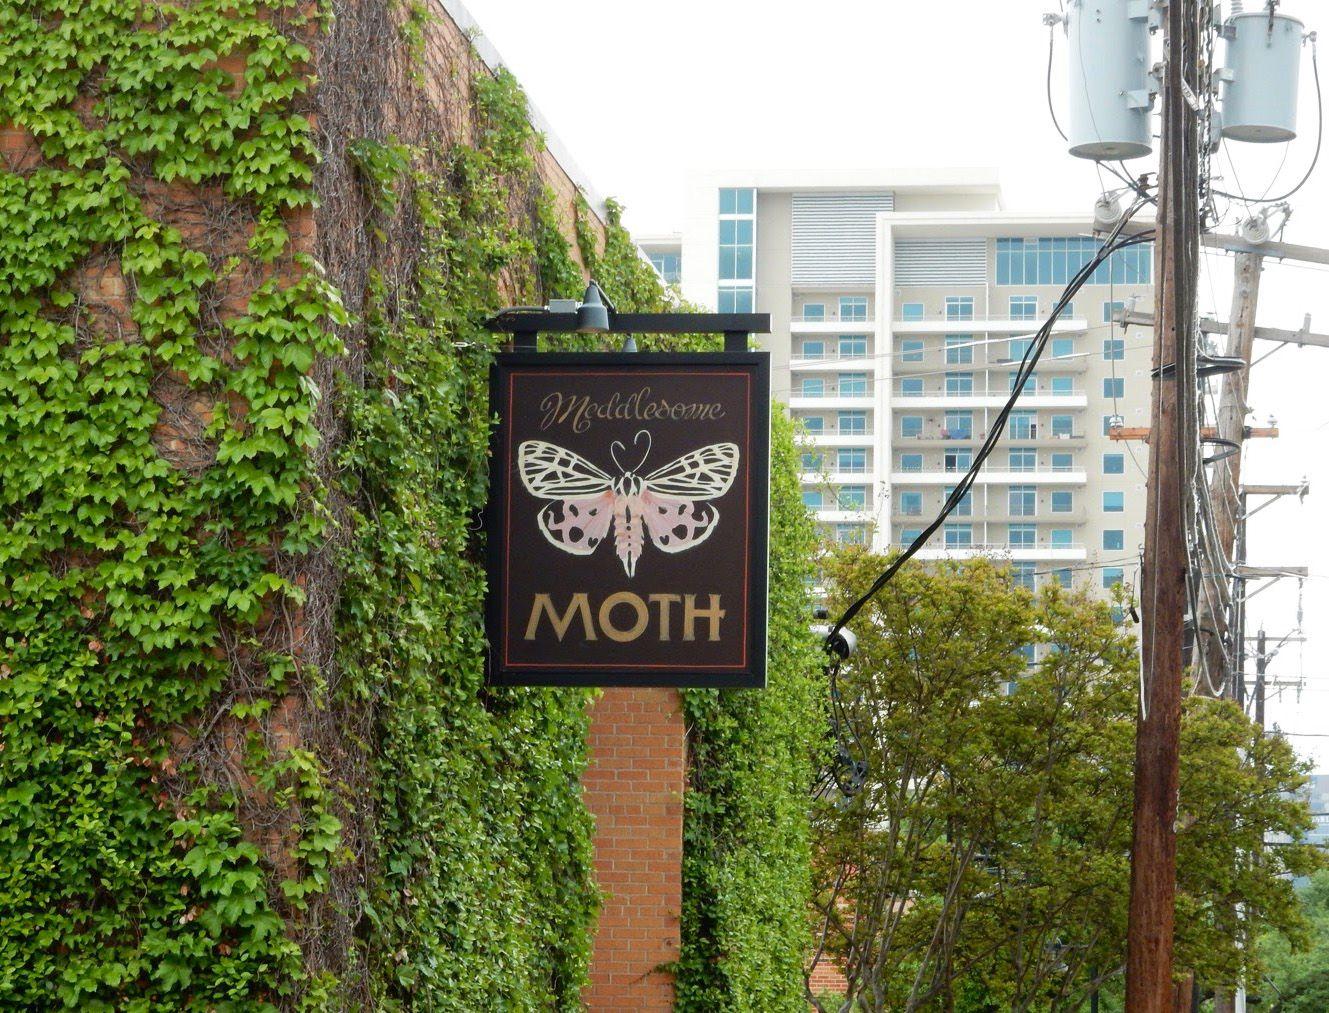 A vine-covered building with a sign for "Meddlesome Moth."